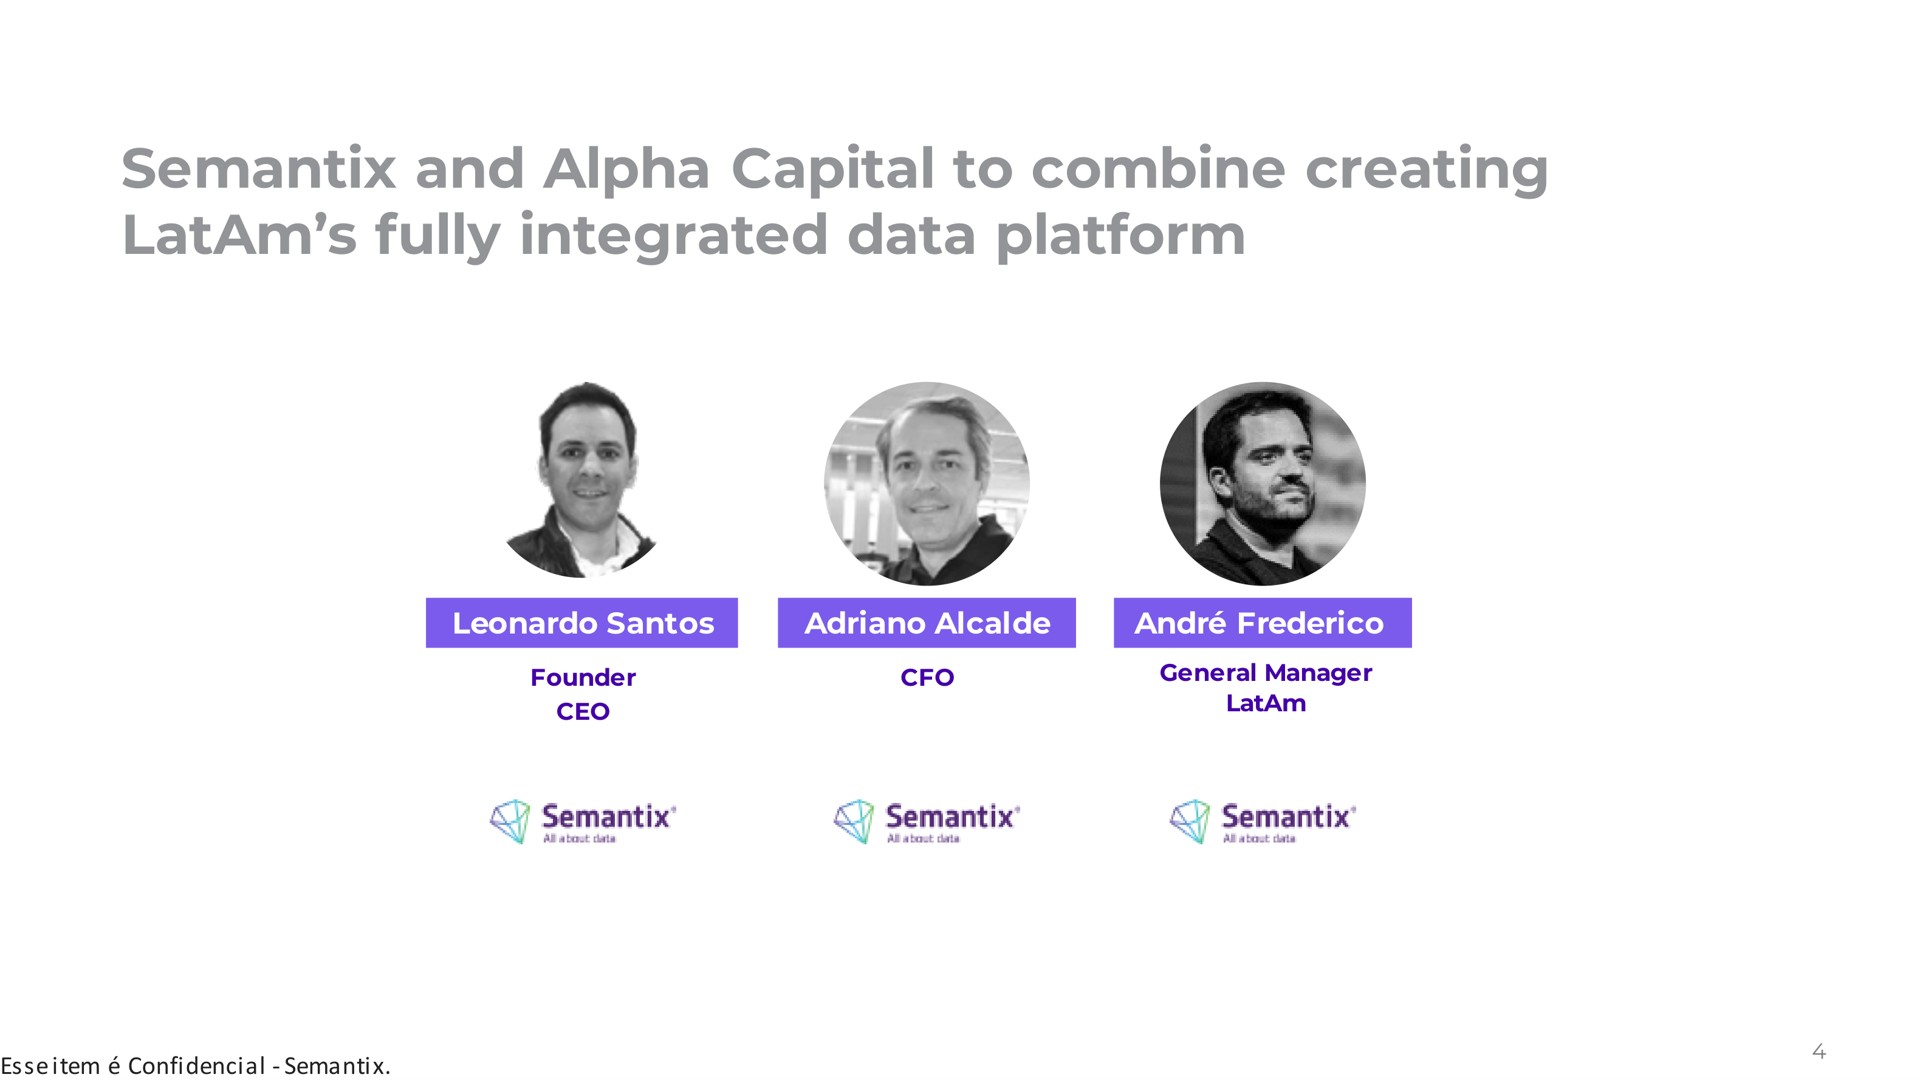 and alpha capital to combine creating fully integrated data platform | Semantix